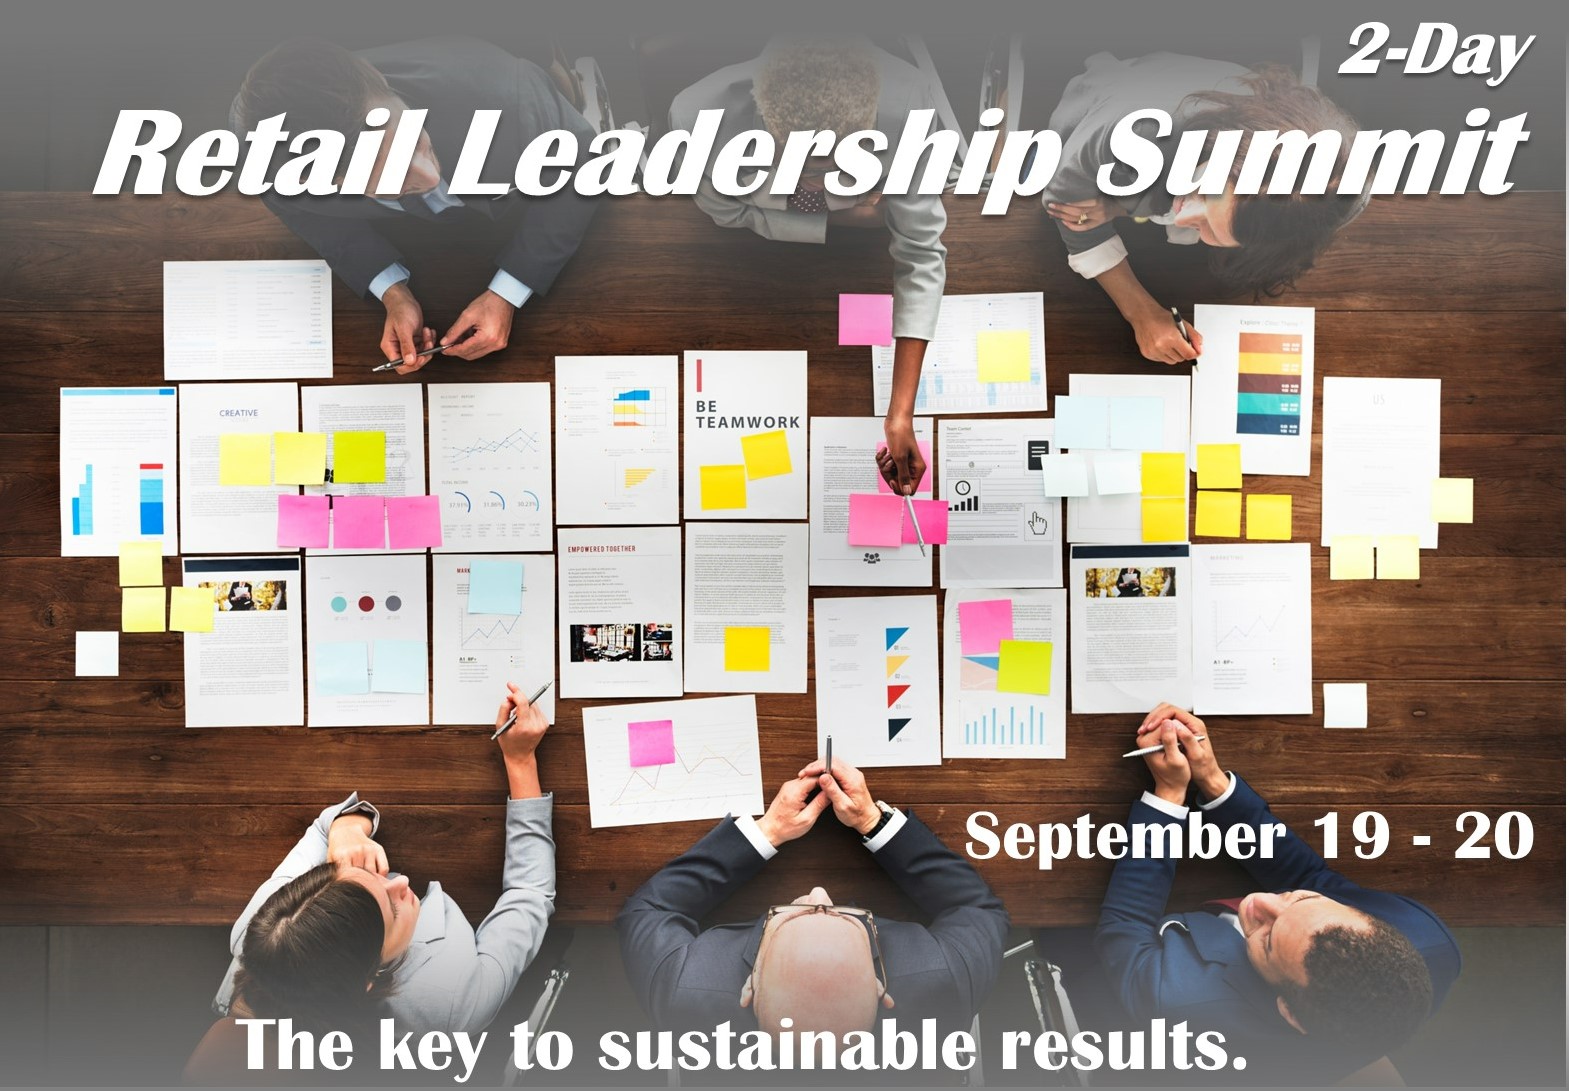 Retail Leadership Summit with Graff Retail Retail Council of Canada